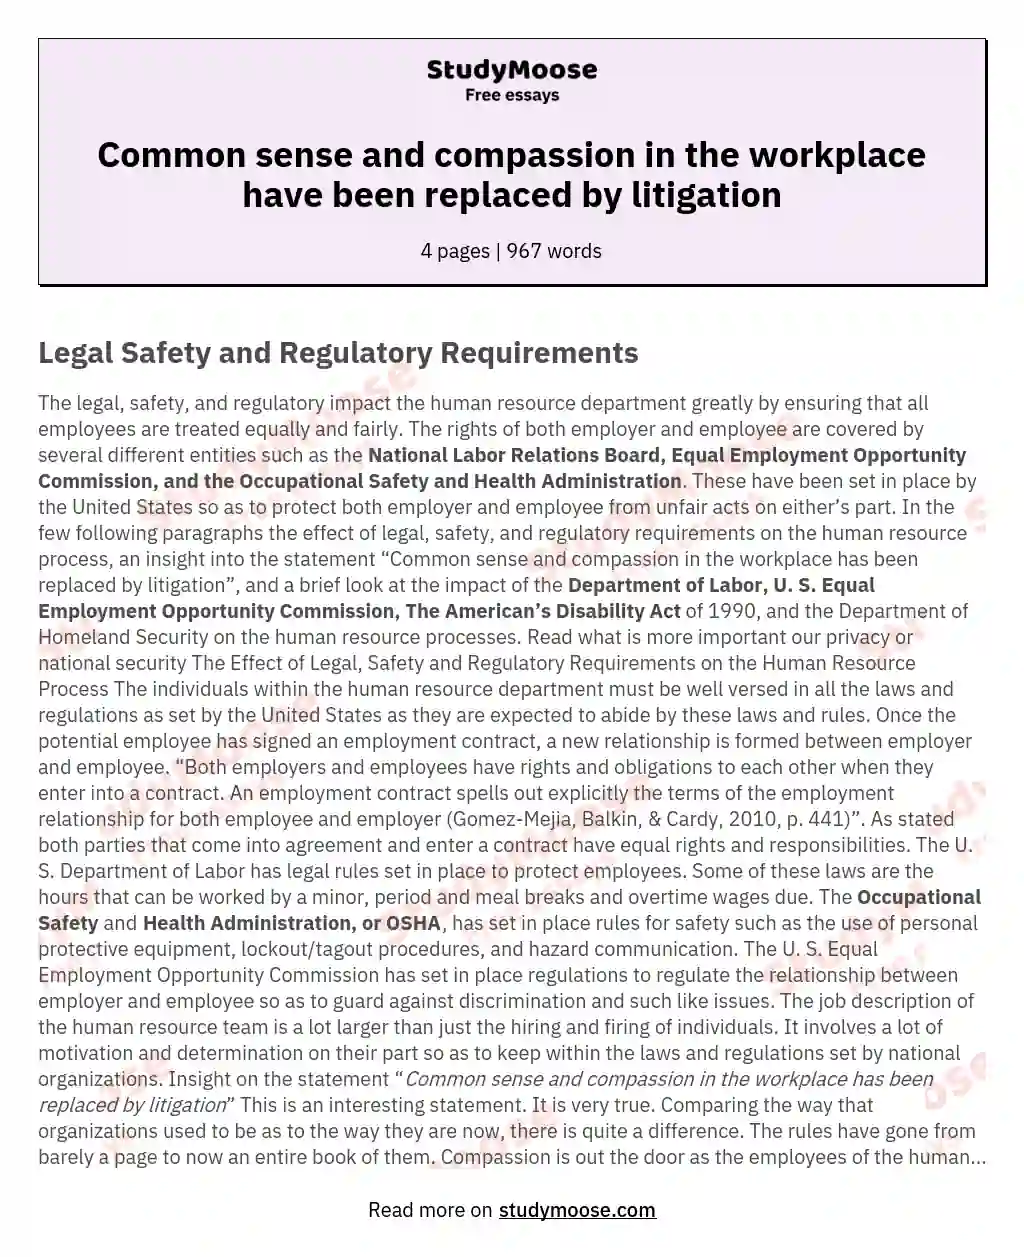 Common sense and compassion in the workplace have been replaced by litigation essay